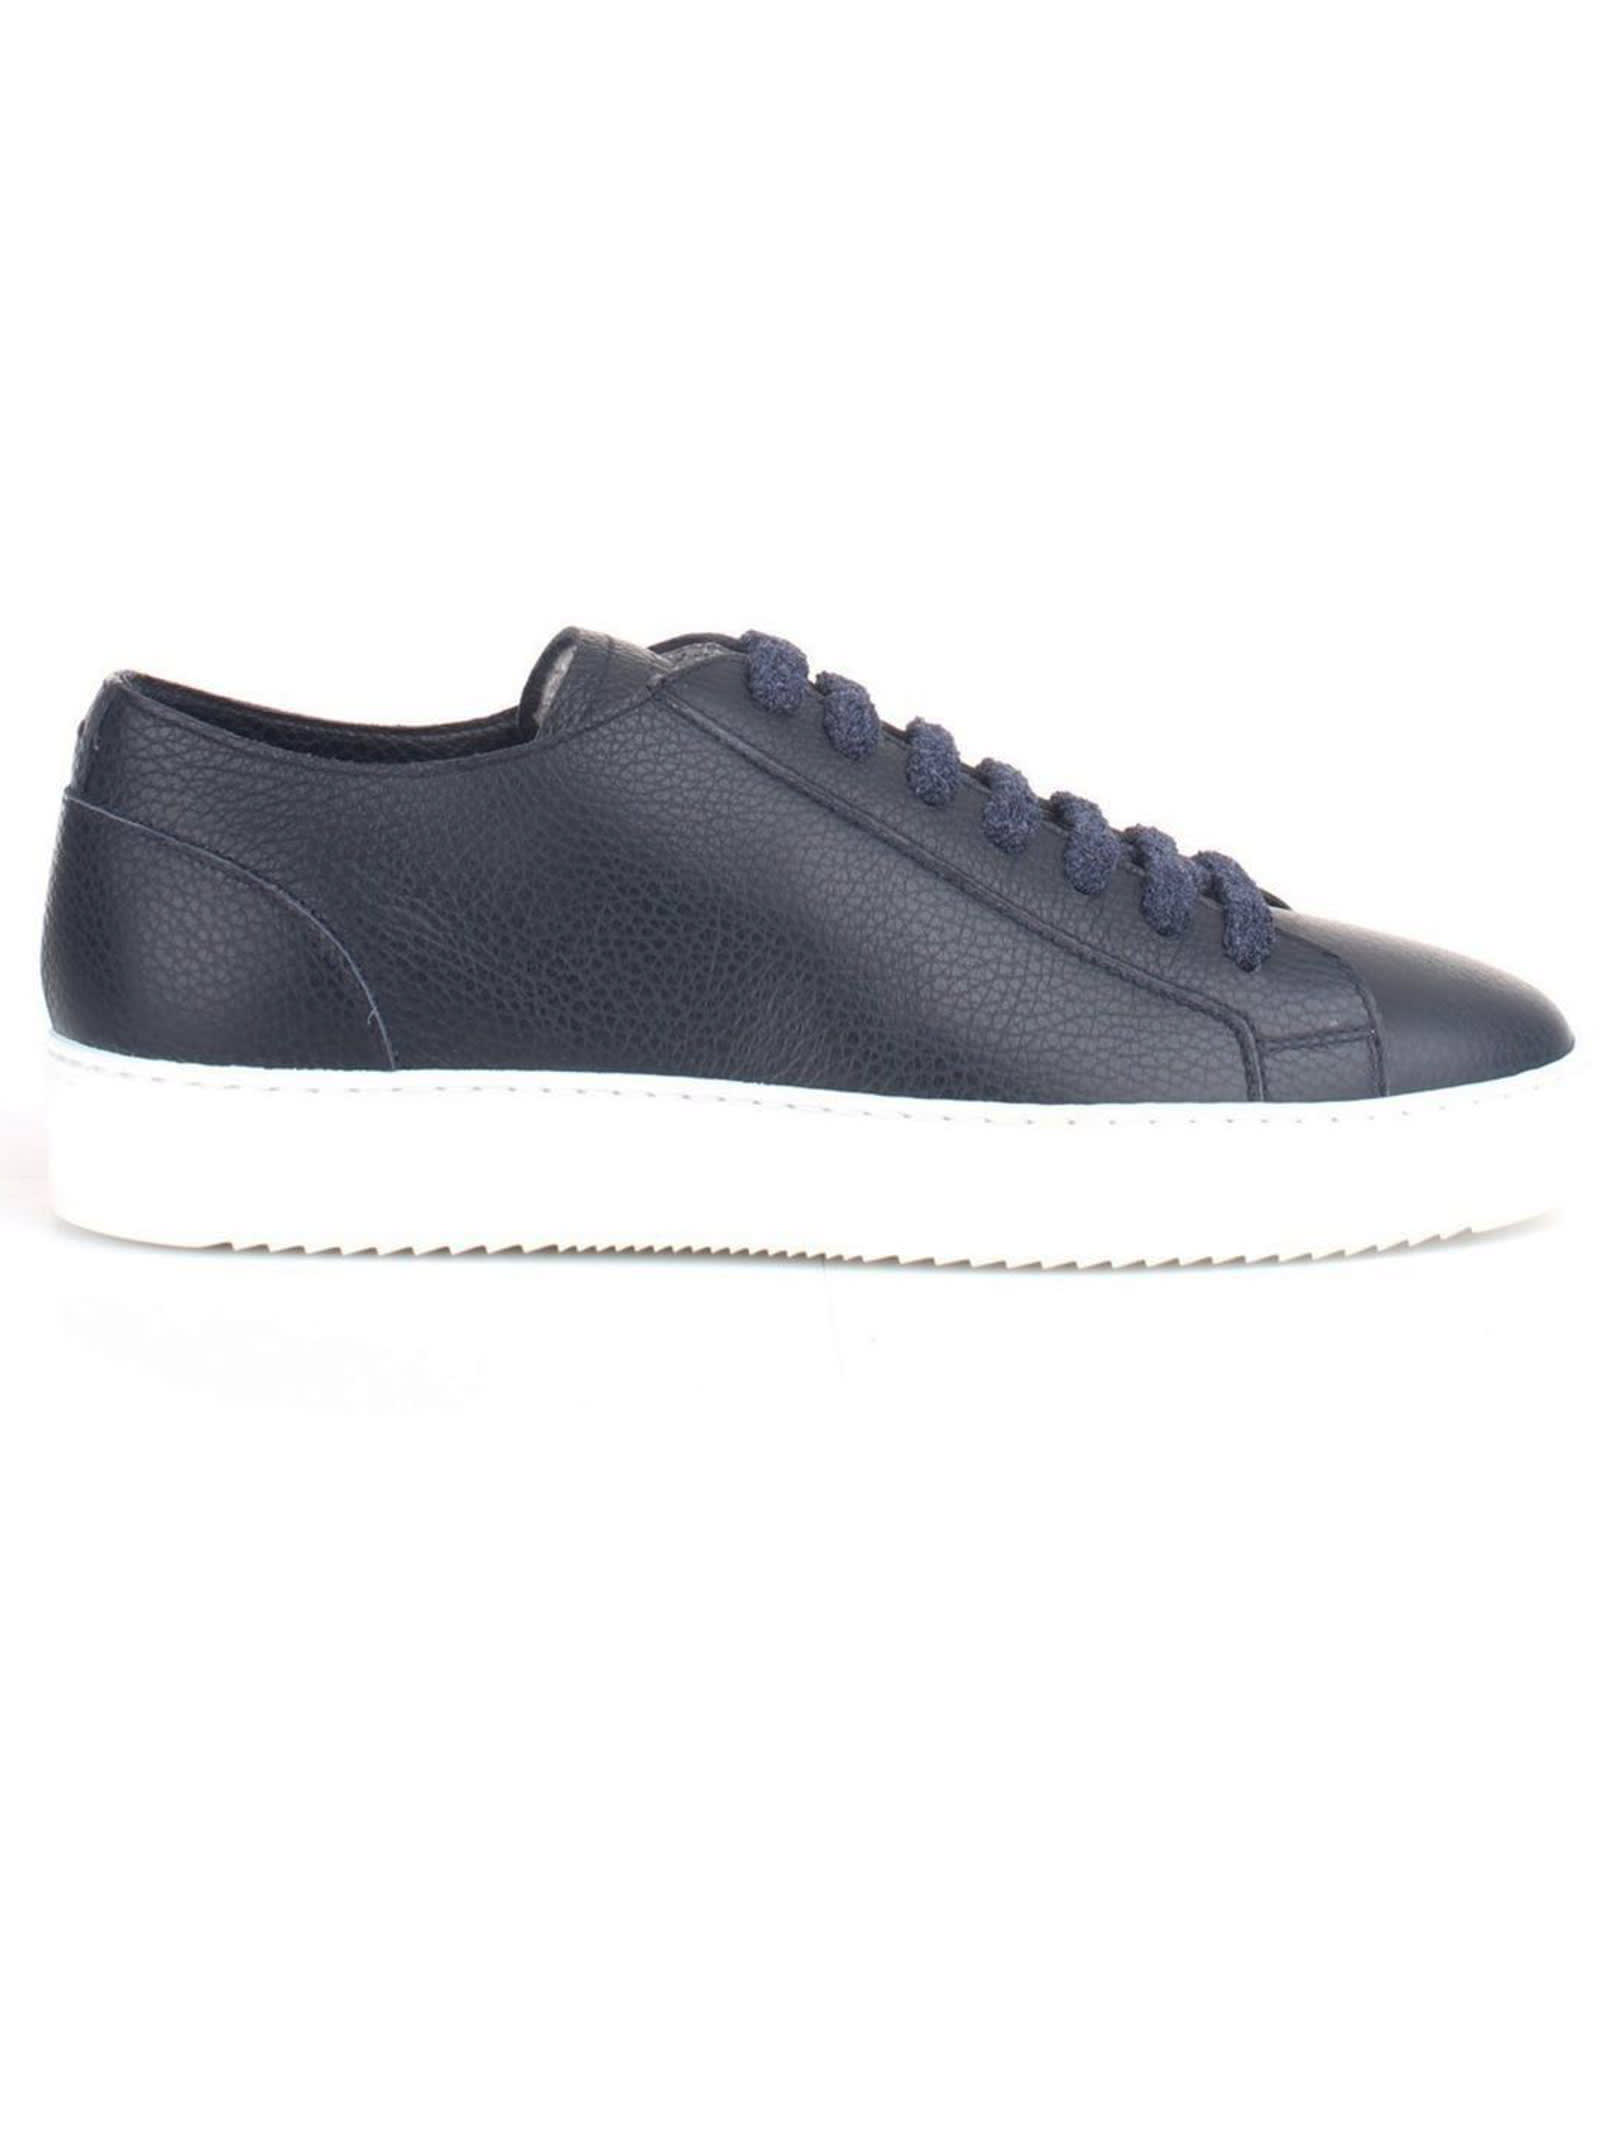 Doucal's Sneakers Tumbled Blue Calfskin